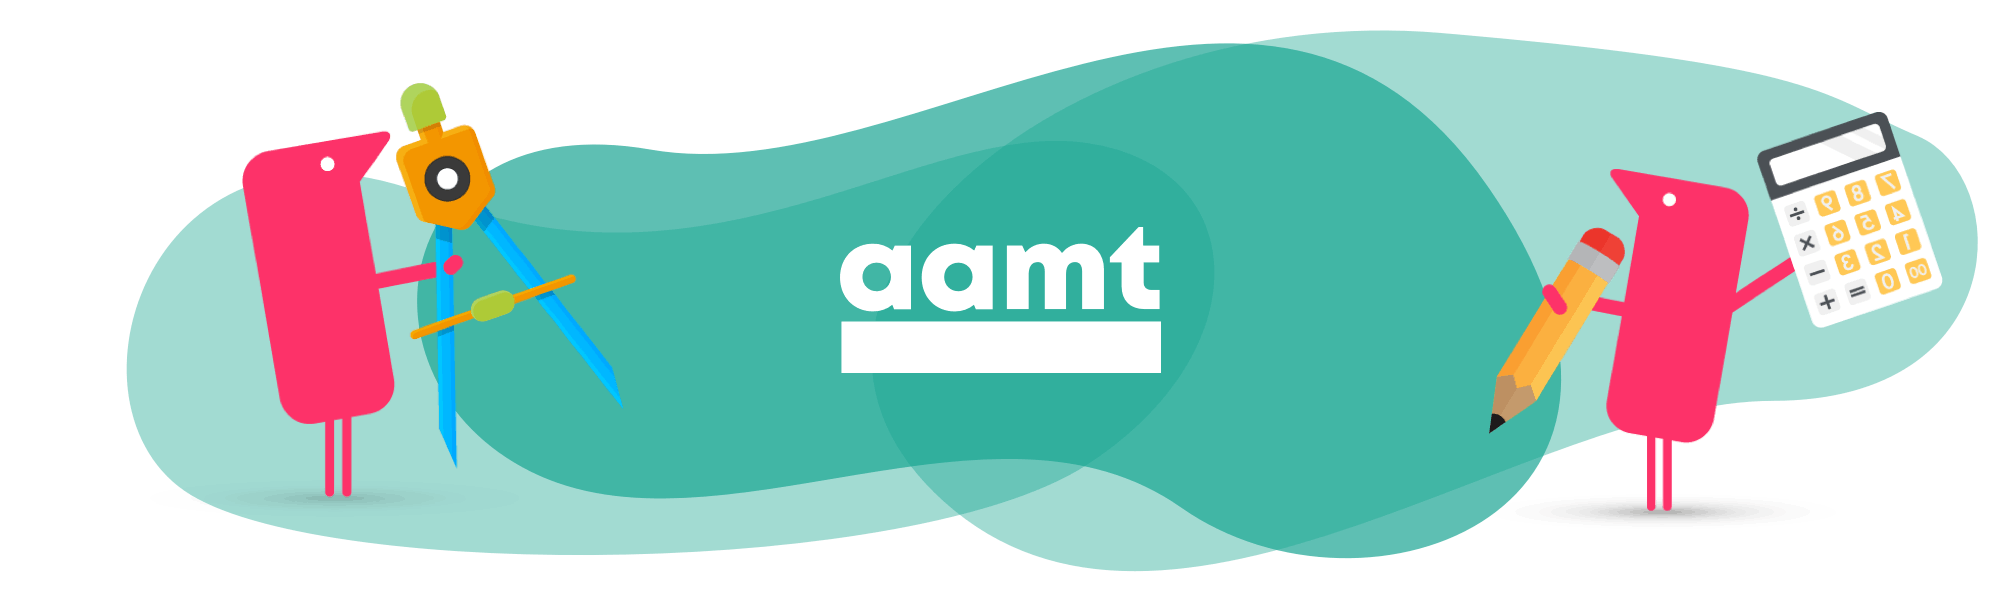 AAMT Logo, with texthelpers using a calculator, a pencil and a compass.